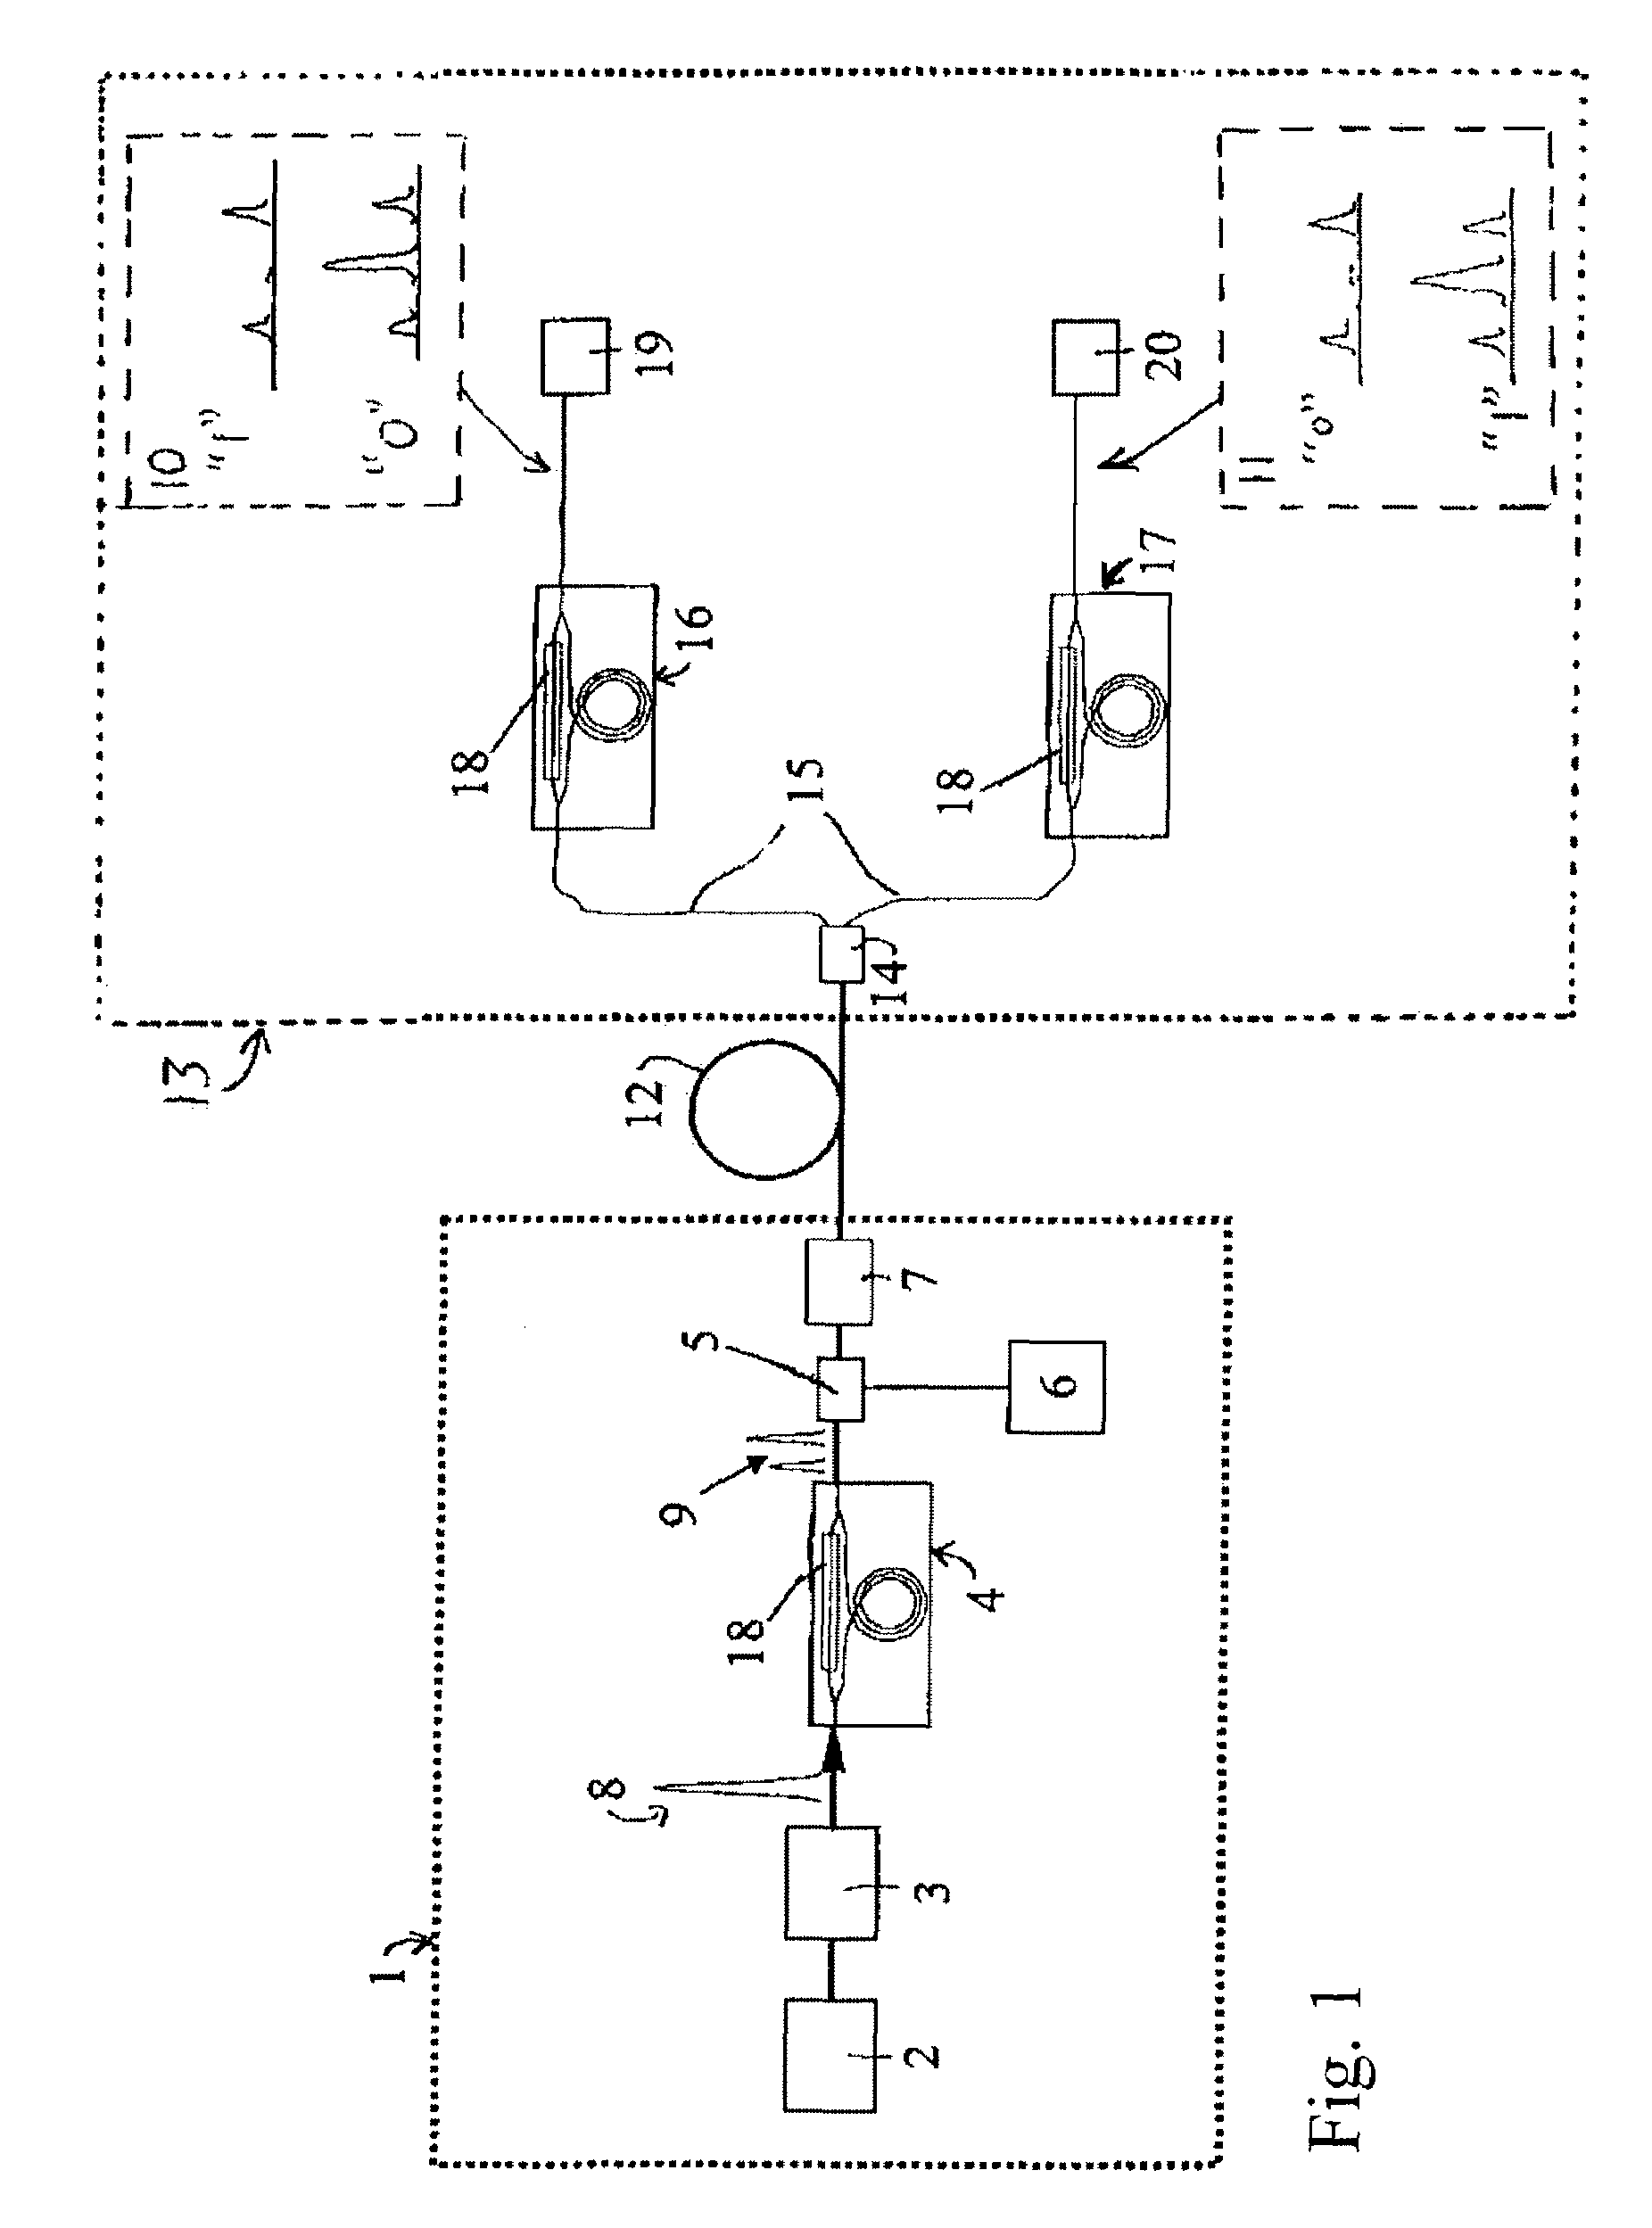 Method and apparatus for use in encrypted communication